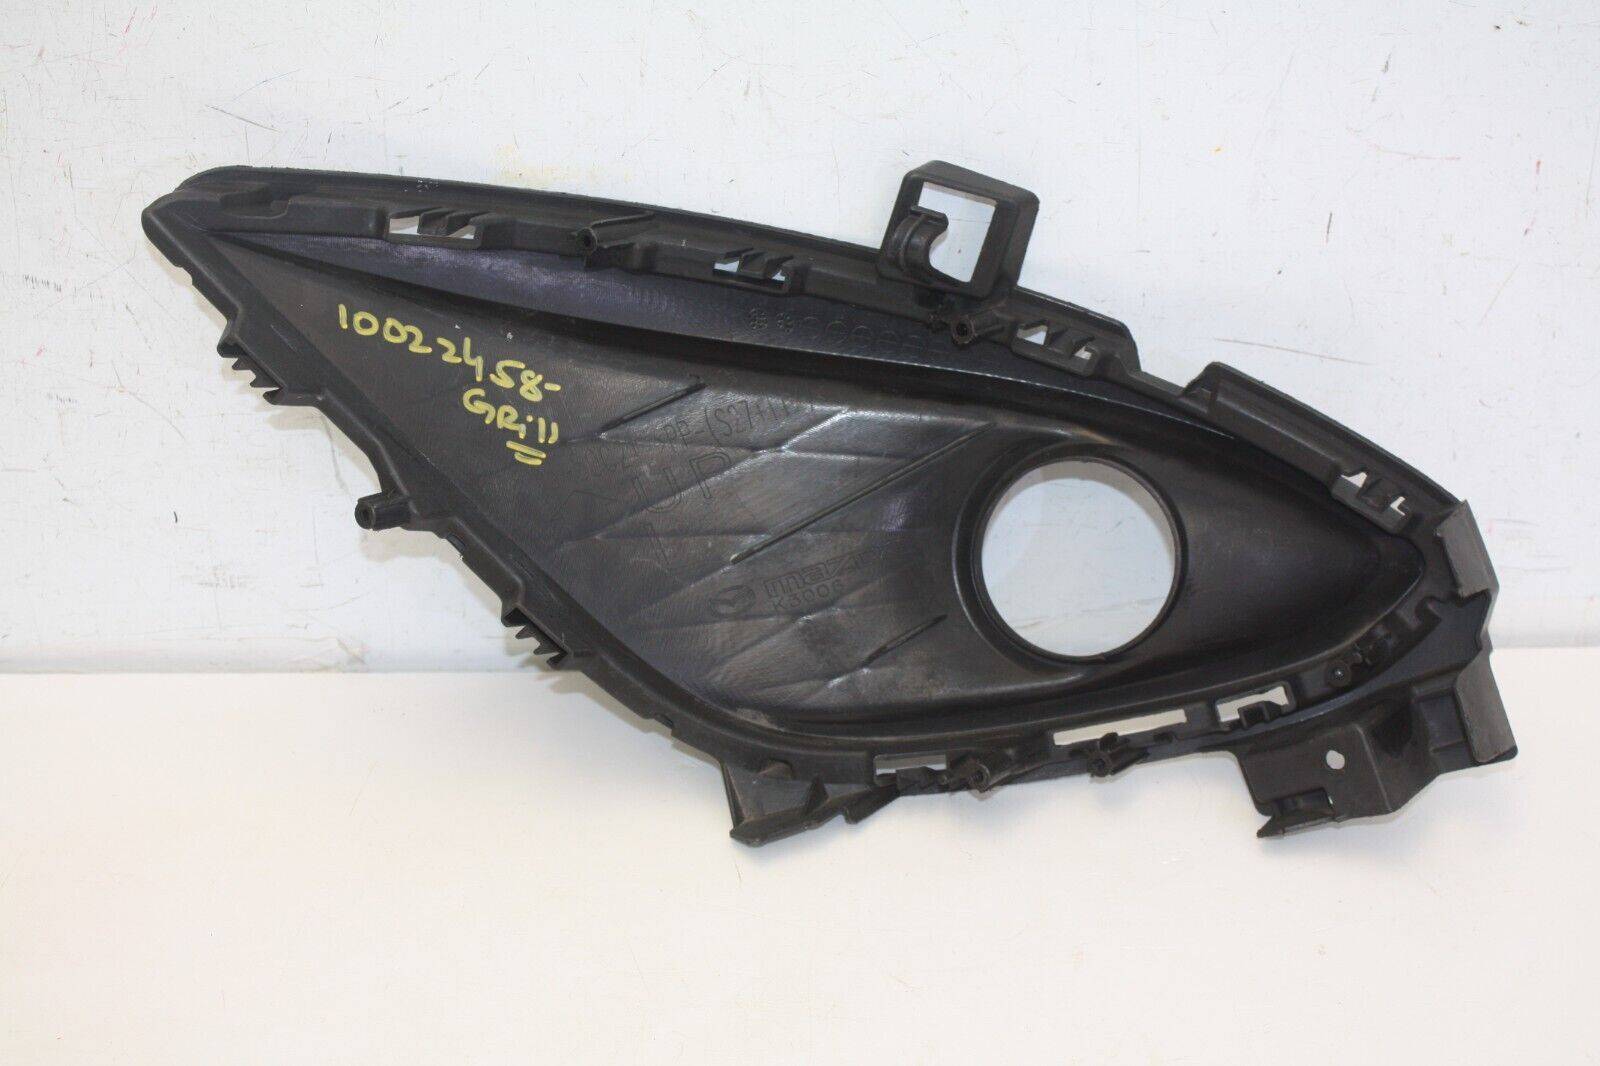 Mazda-5-Front-Bumper-Left-Side-Lower-Grill-2010-TO-2015-C513-50C21-Genuine-176241201496-10